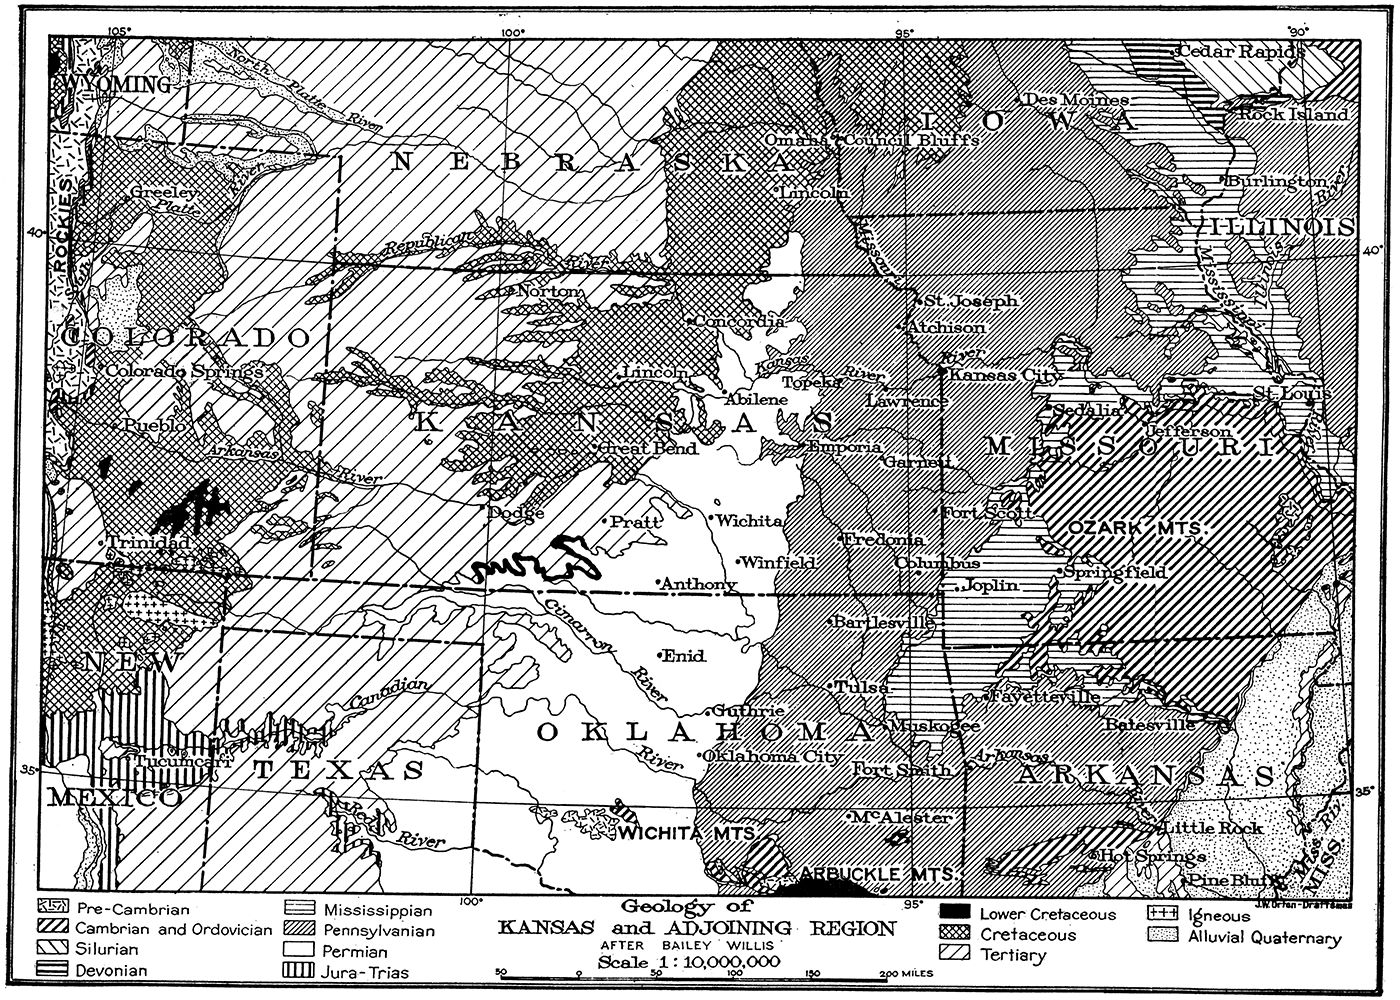 Map showing the geology of Kansas and the adjoining region.